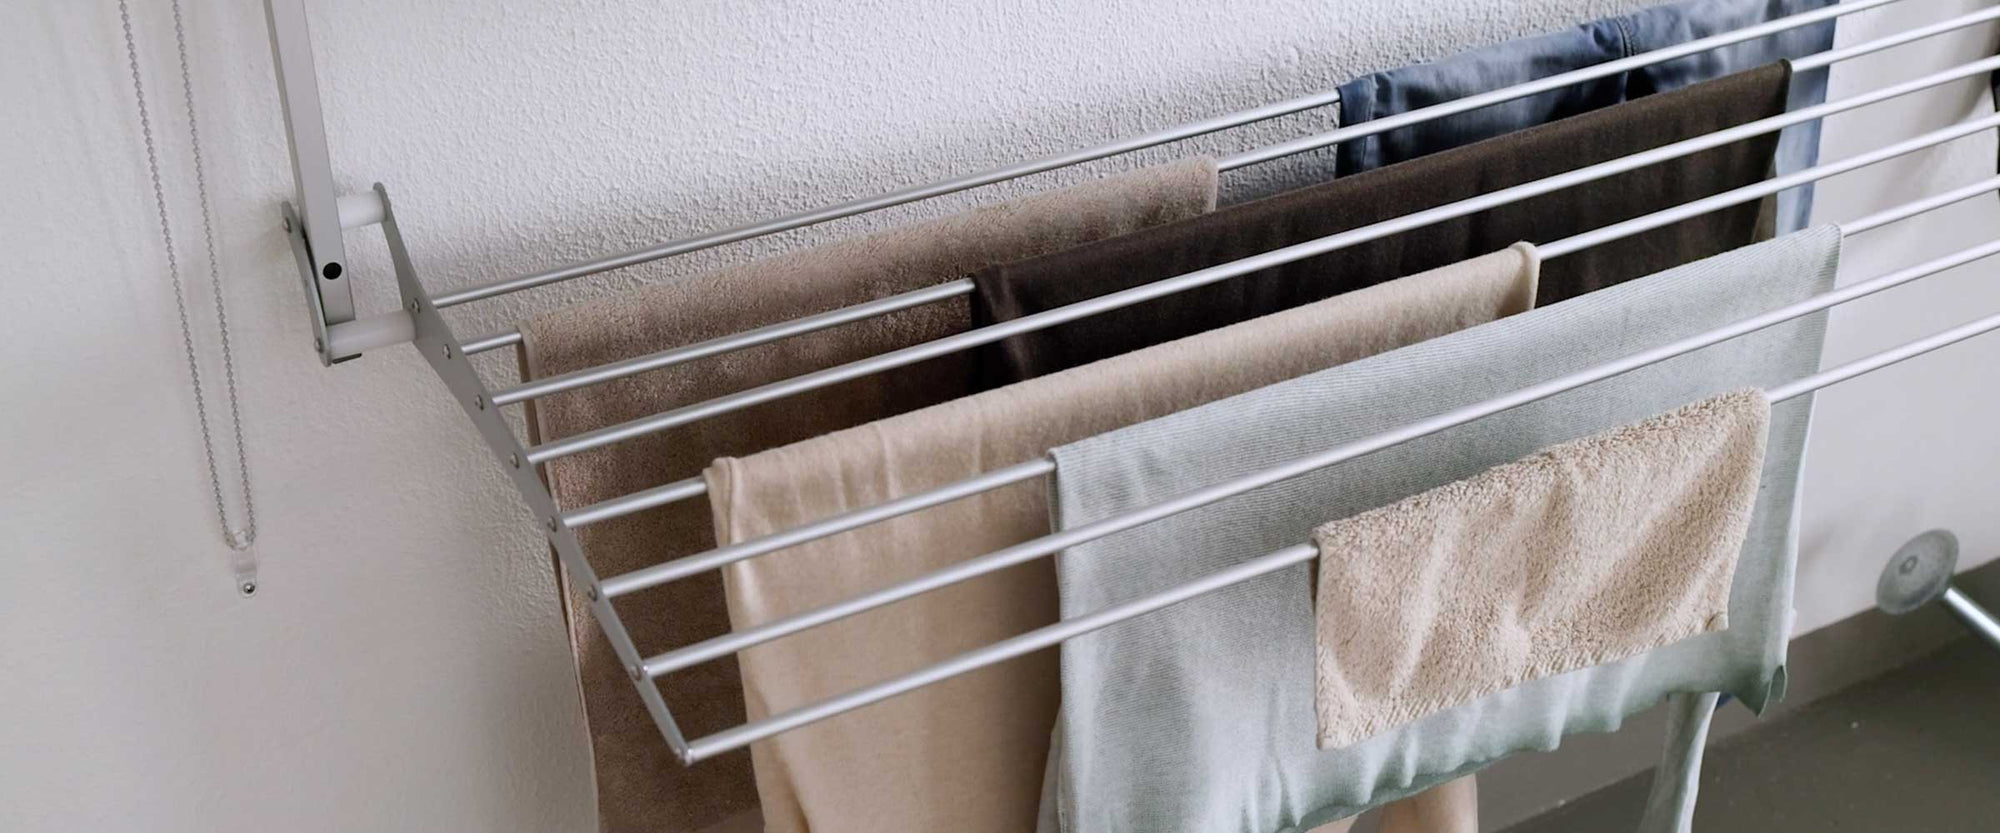 Wall Mounted Clothes Drying Rack | Foxydry Wall